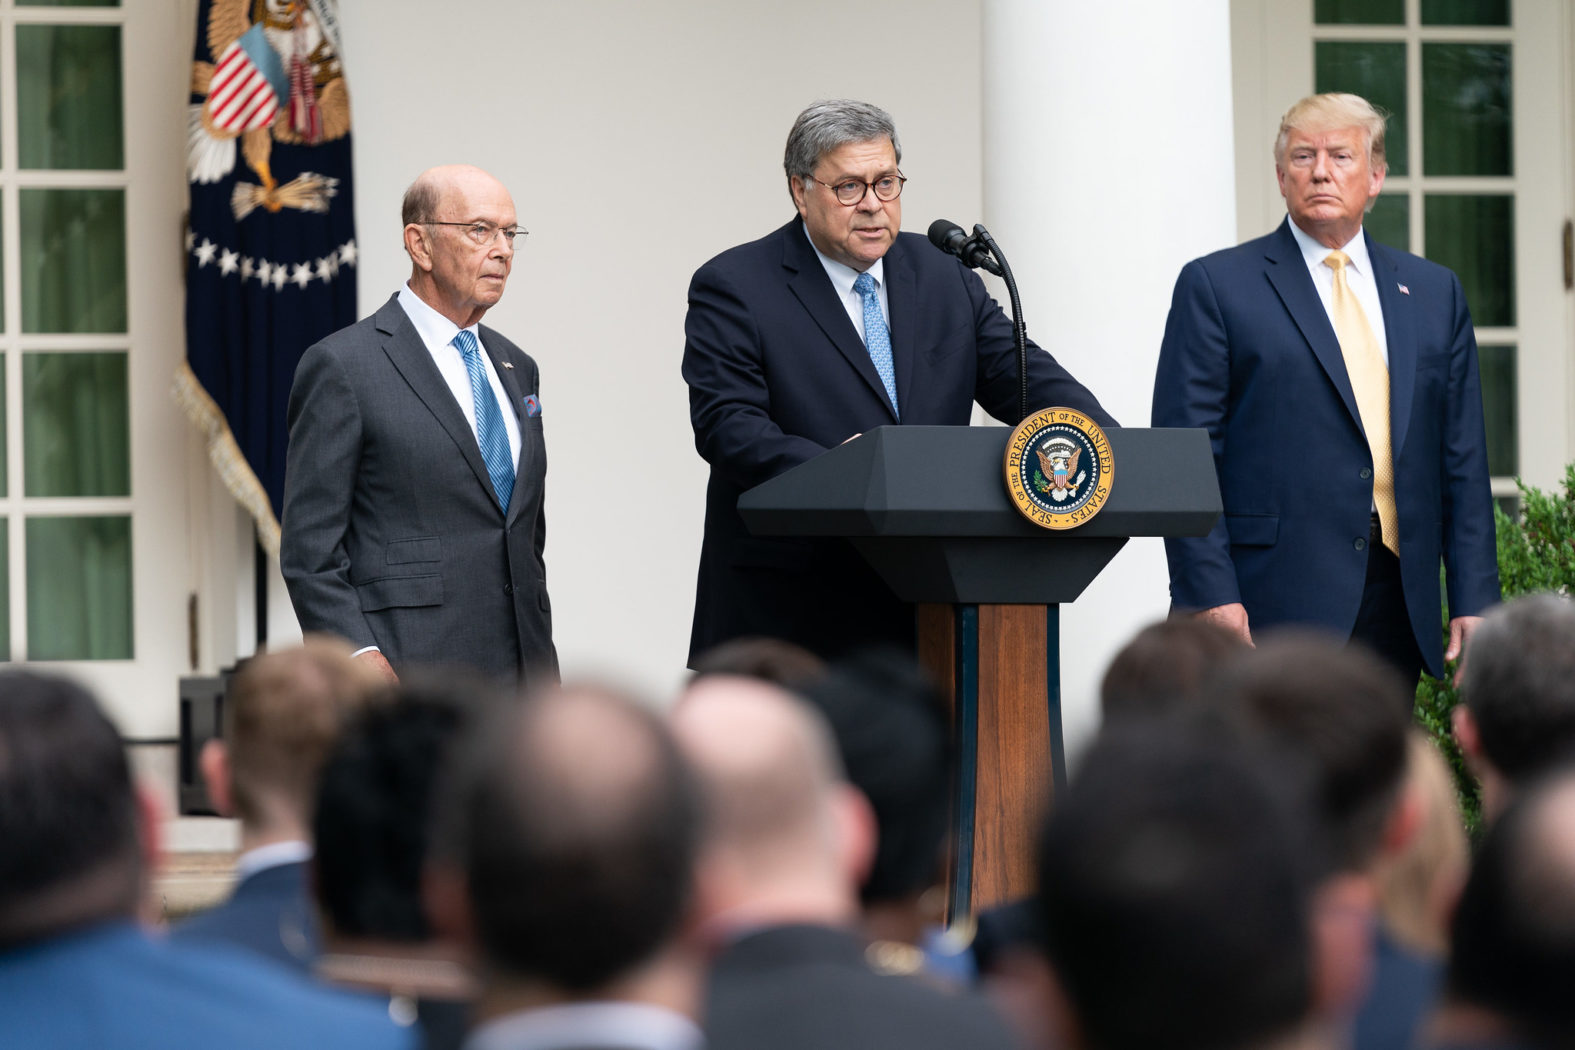 President Donald J. Trump, joined by Secretary of Commerce Wilbur Ross, listens as U.S. Attorney General William Barr delivers remarks Thursday, July 11, 2019, in the Rose Garden of the White House to expand on President Trump’s Executive Order requiring every department and agency in the federal government to provide the Department of Commerce with all requested records regarding the number of citizens and non-citizens in the United States. (Official White House Photo by Shealah Craighead)